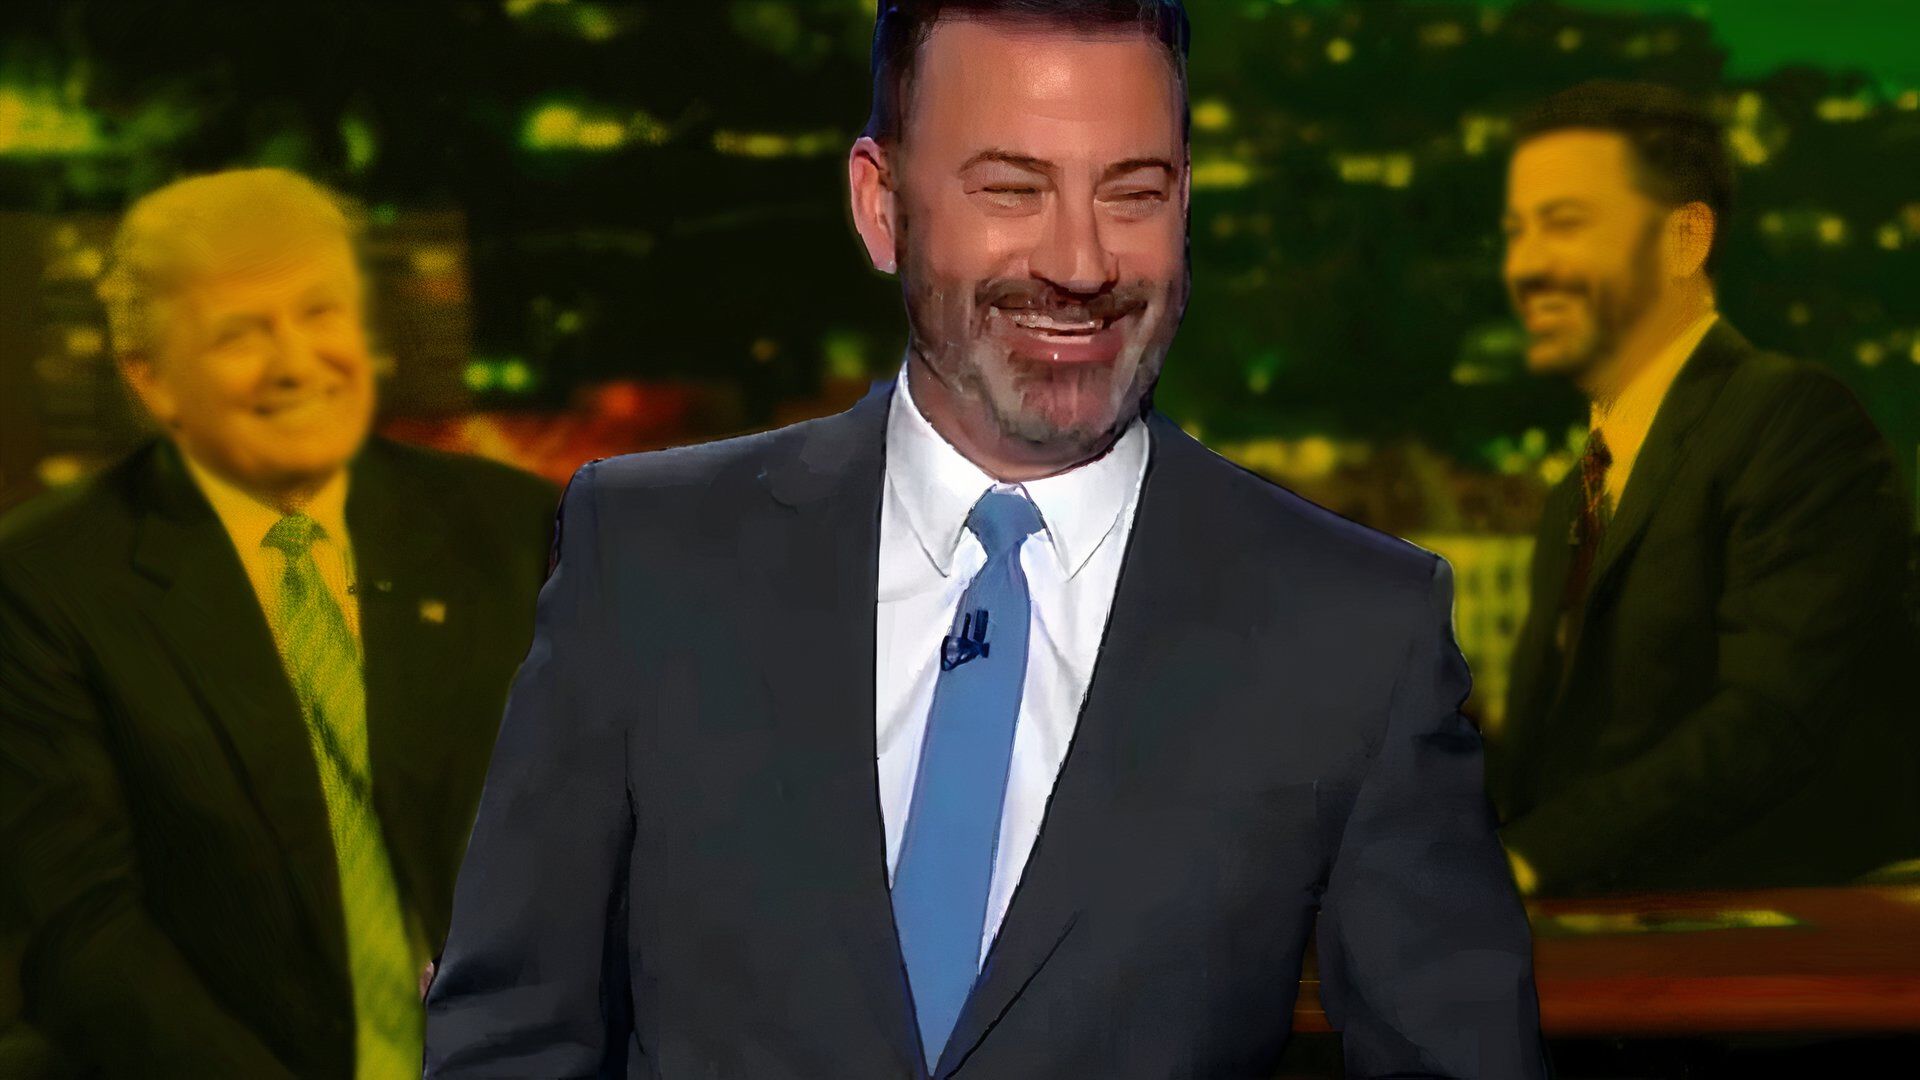 Jimmy Kimmel laughing and interviewing Donald Trump